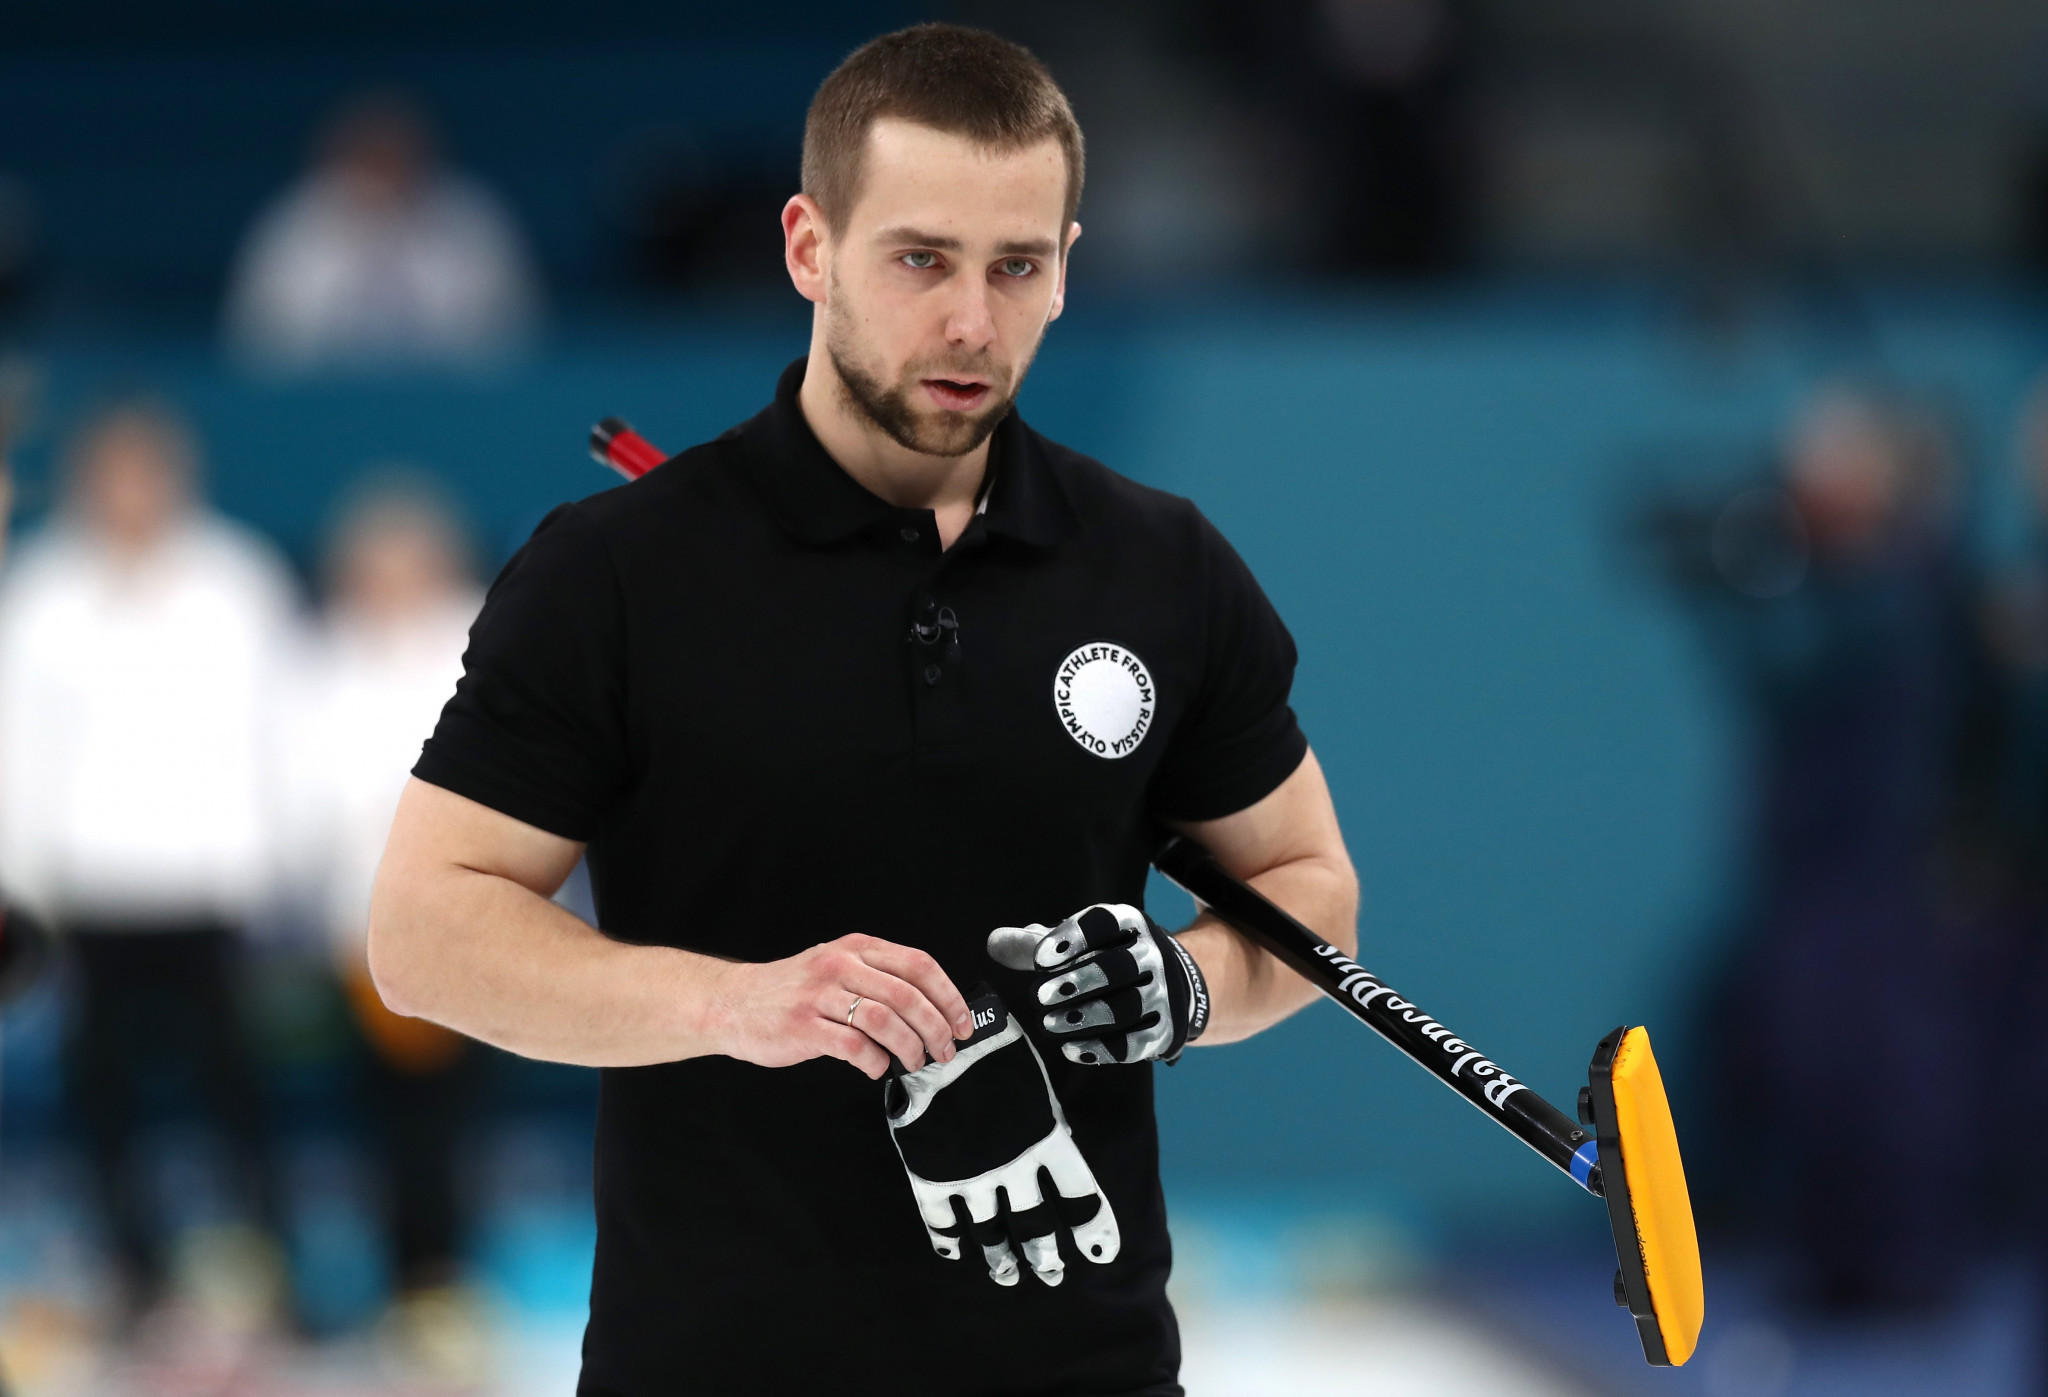 Russian curler handed four-year ban following positive test at Pyeongchang 2018 